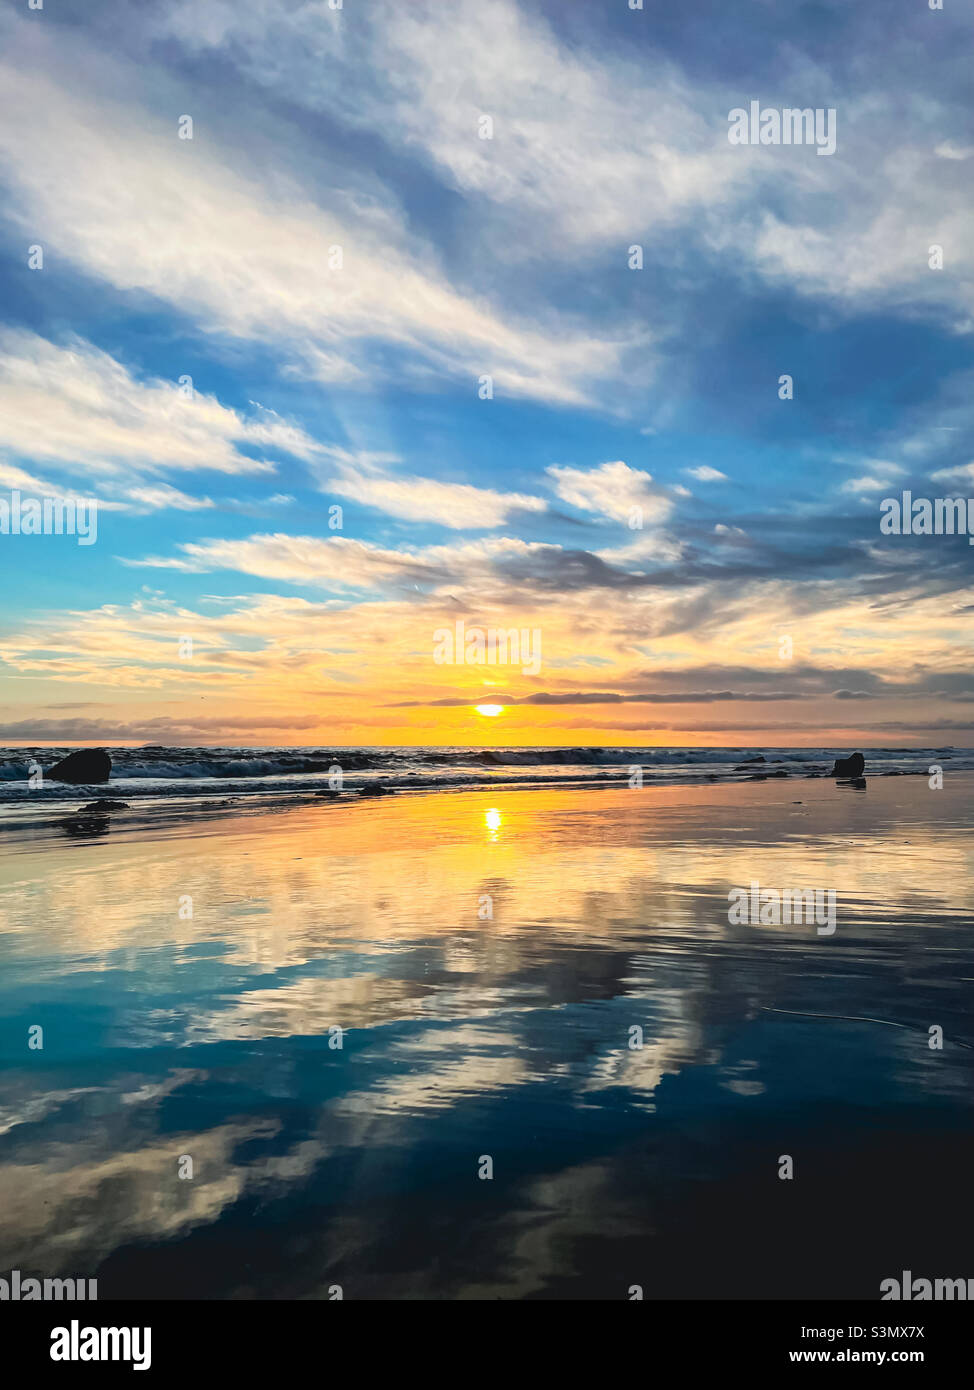 Low angle view of dramatic sunset at beach Stock Photo